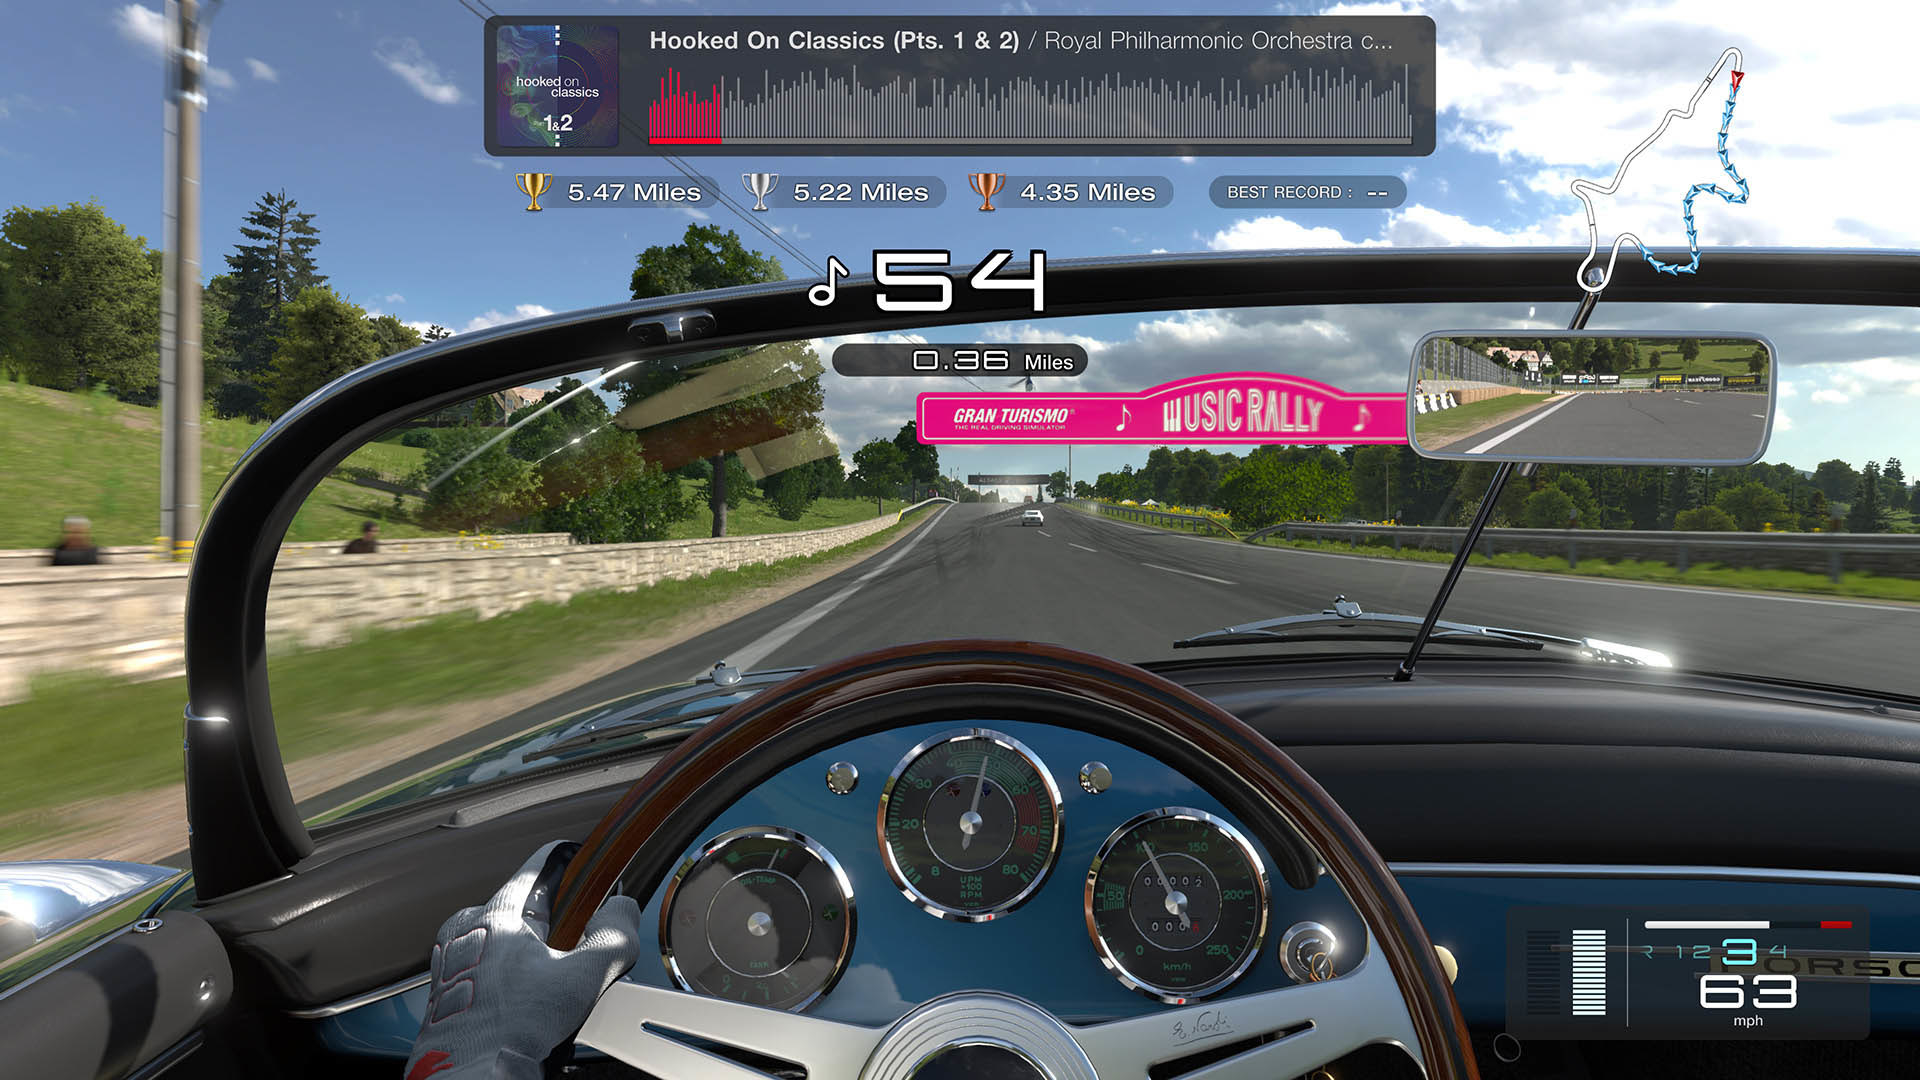 The cockpit view of a race car wheel as the driver races to the beats in a country set race track at noon